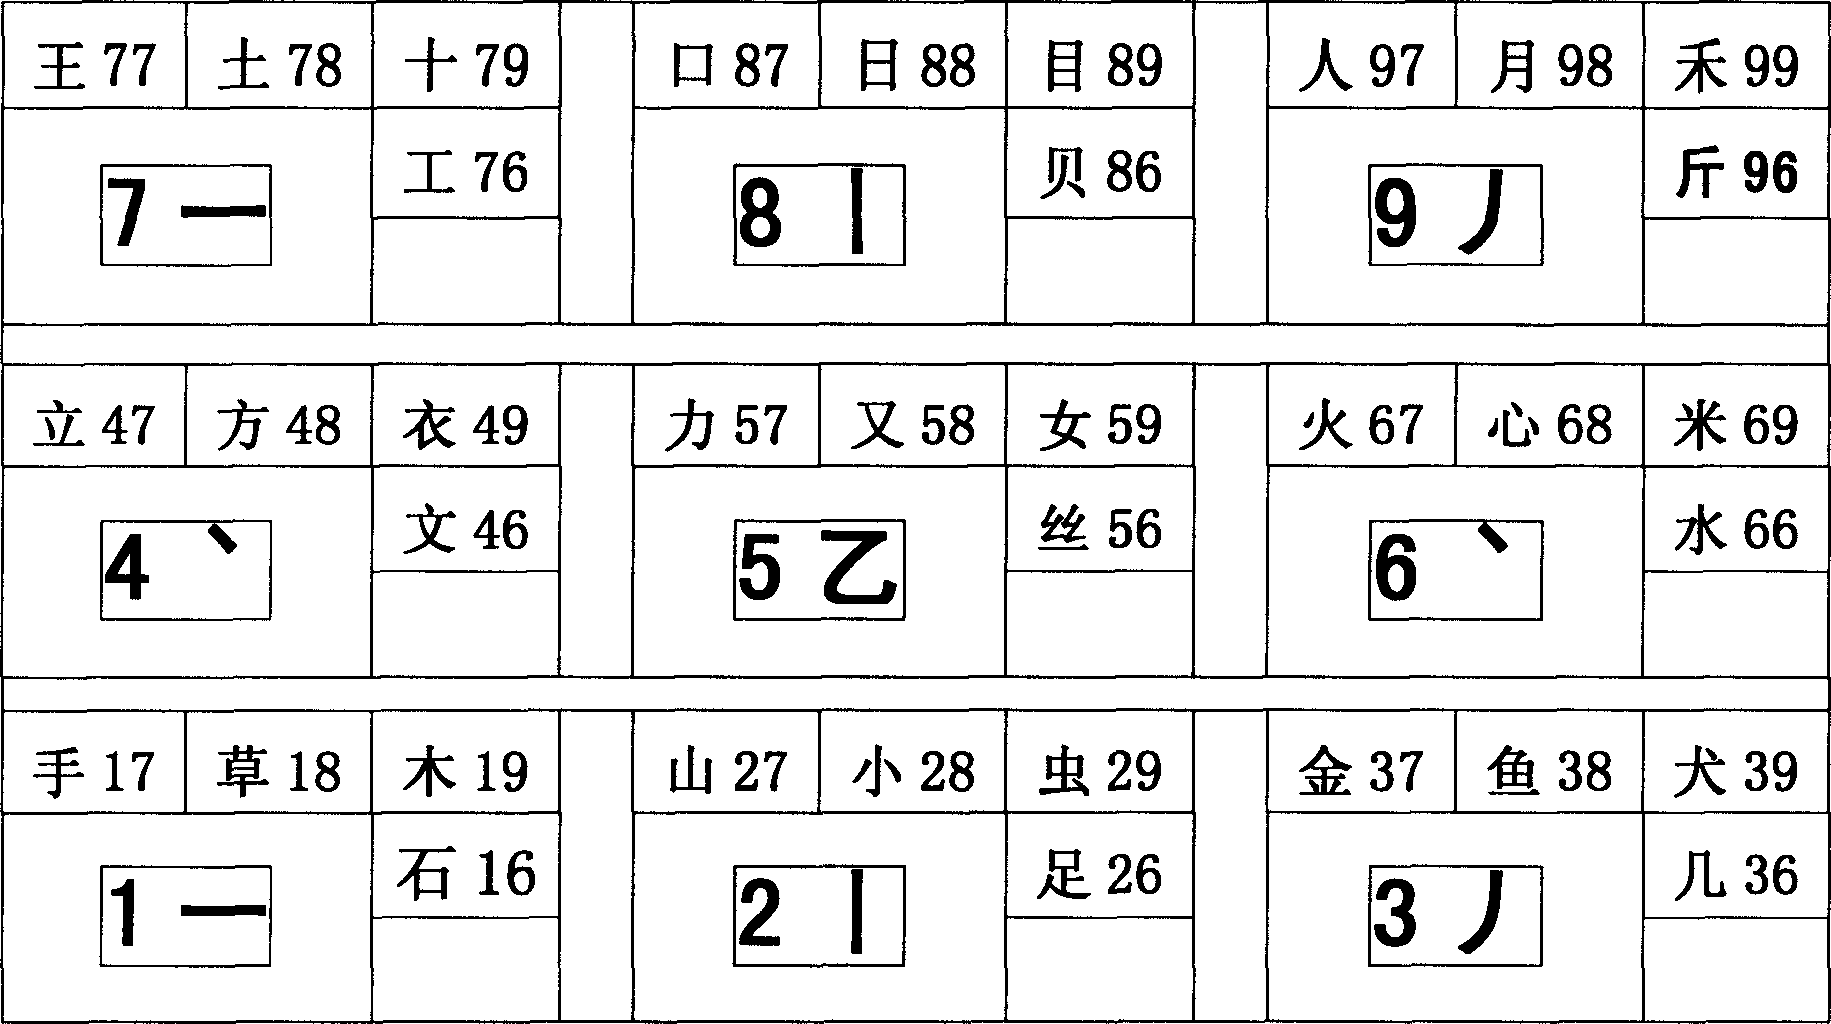 Digital two-digit encode of Chinese and keyboard layout method